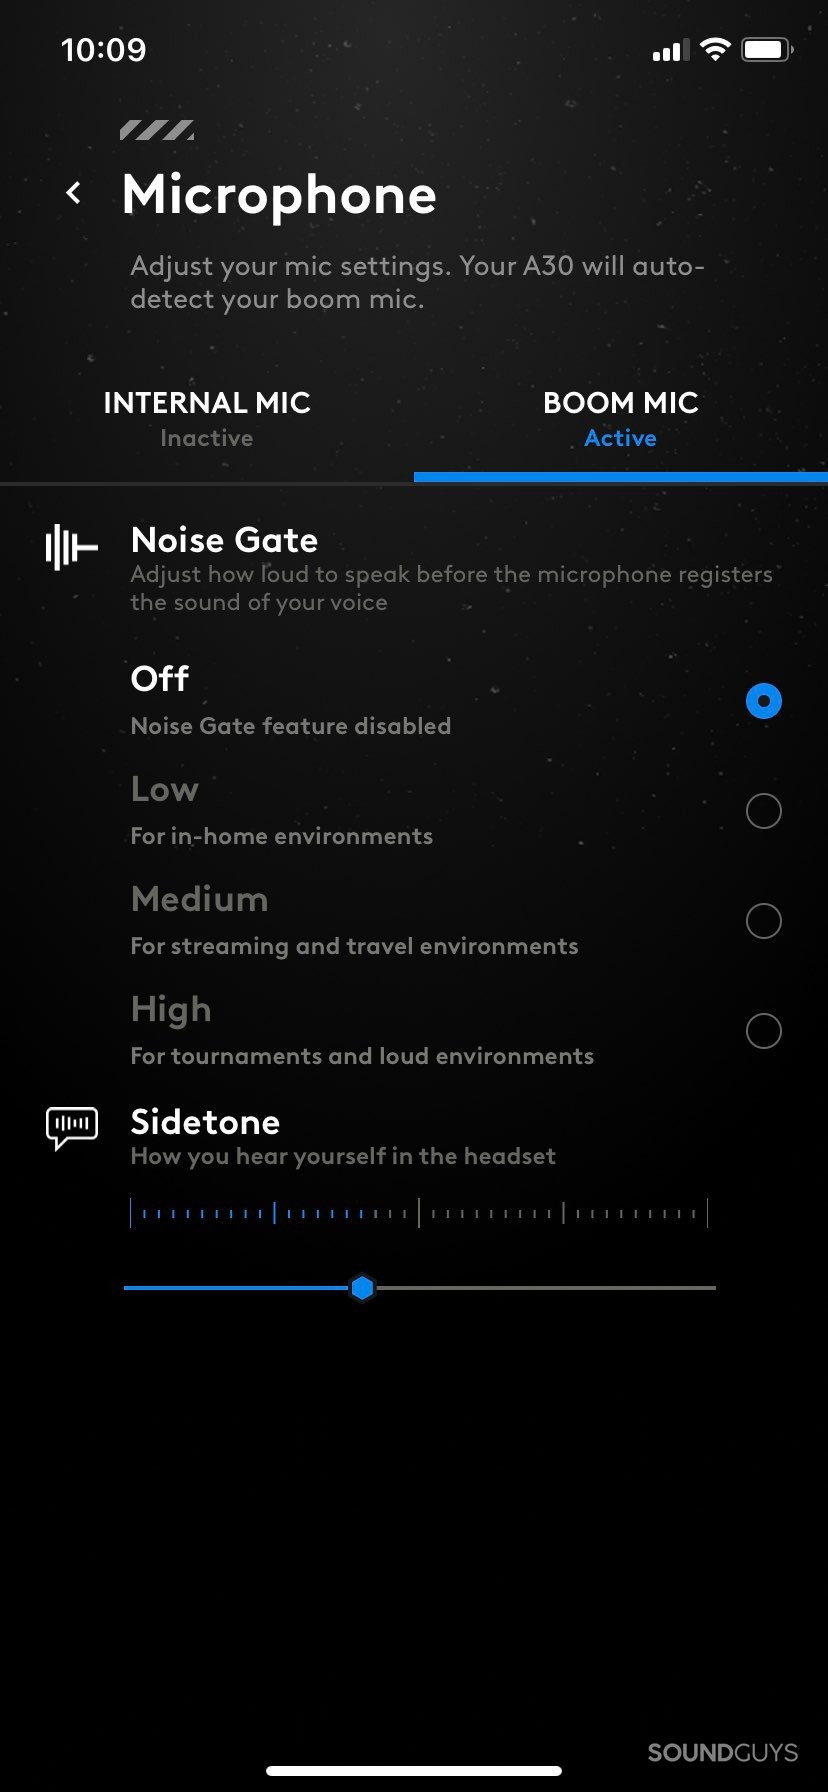 The Logitech G app showing the microphone section, including noise gate and sidetone settings.